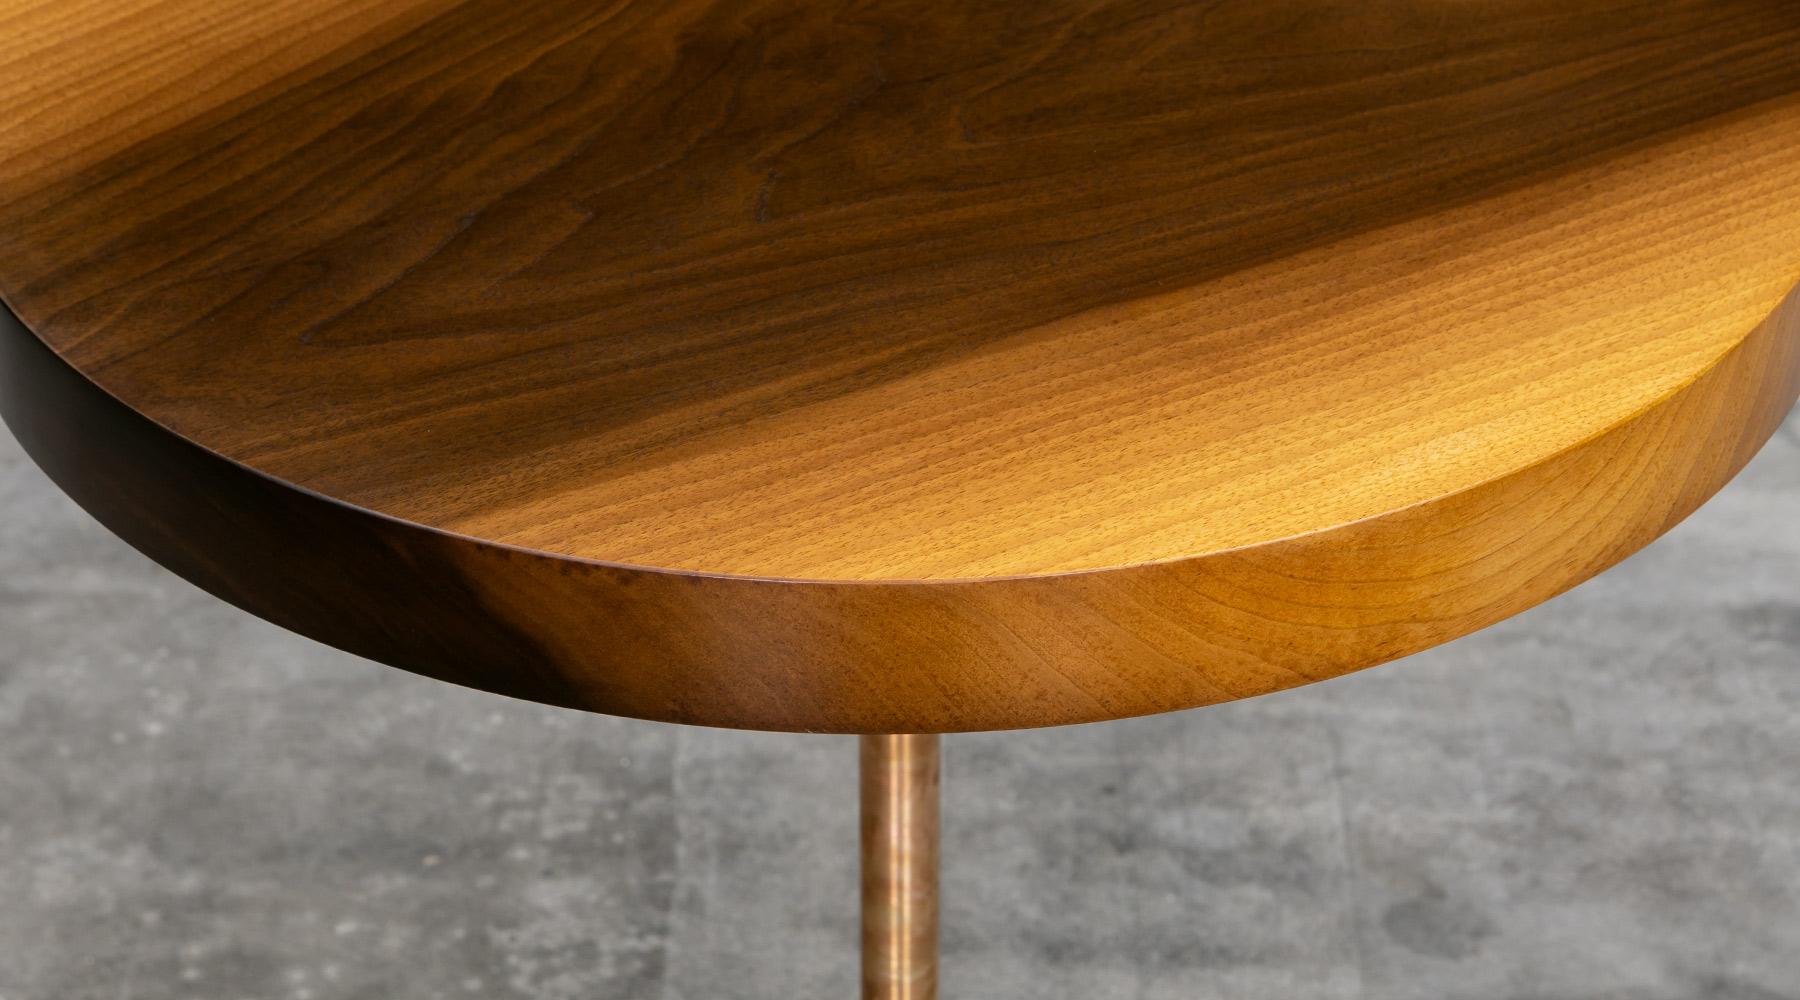 Stunning side table by contemporary German Artist Johannes Hock.
The inherent beauty of the wood becomes visible with this table.
Designed, developed and handcrafted by Atelier Johannes Hock, Frankfurt, Germany.